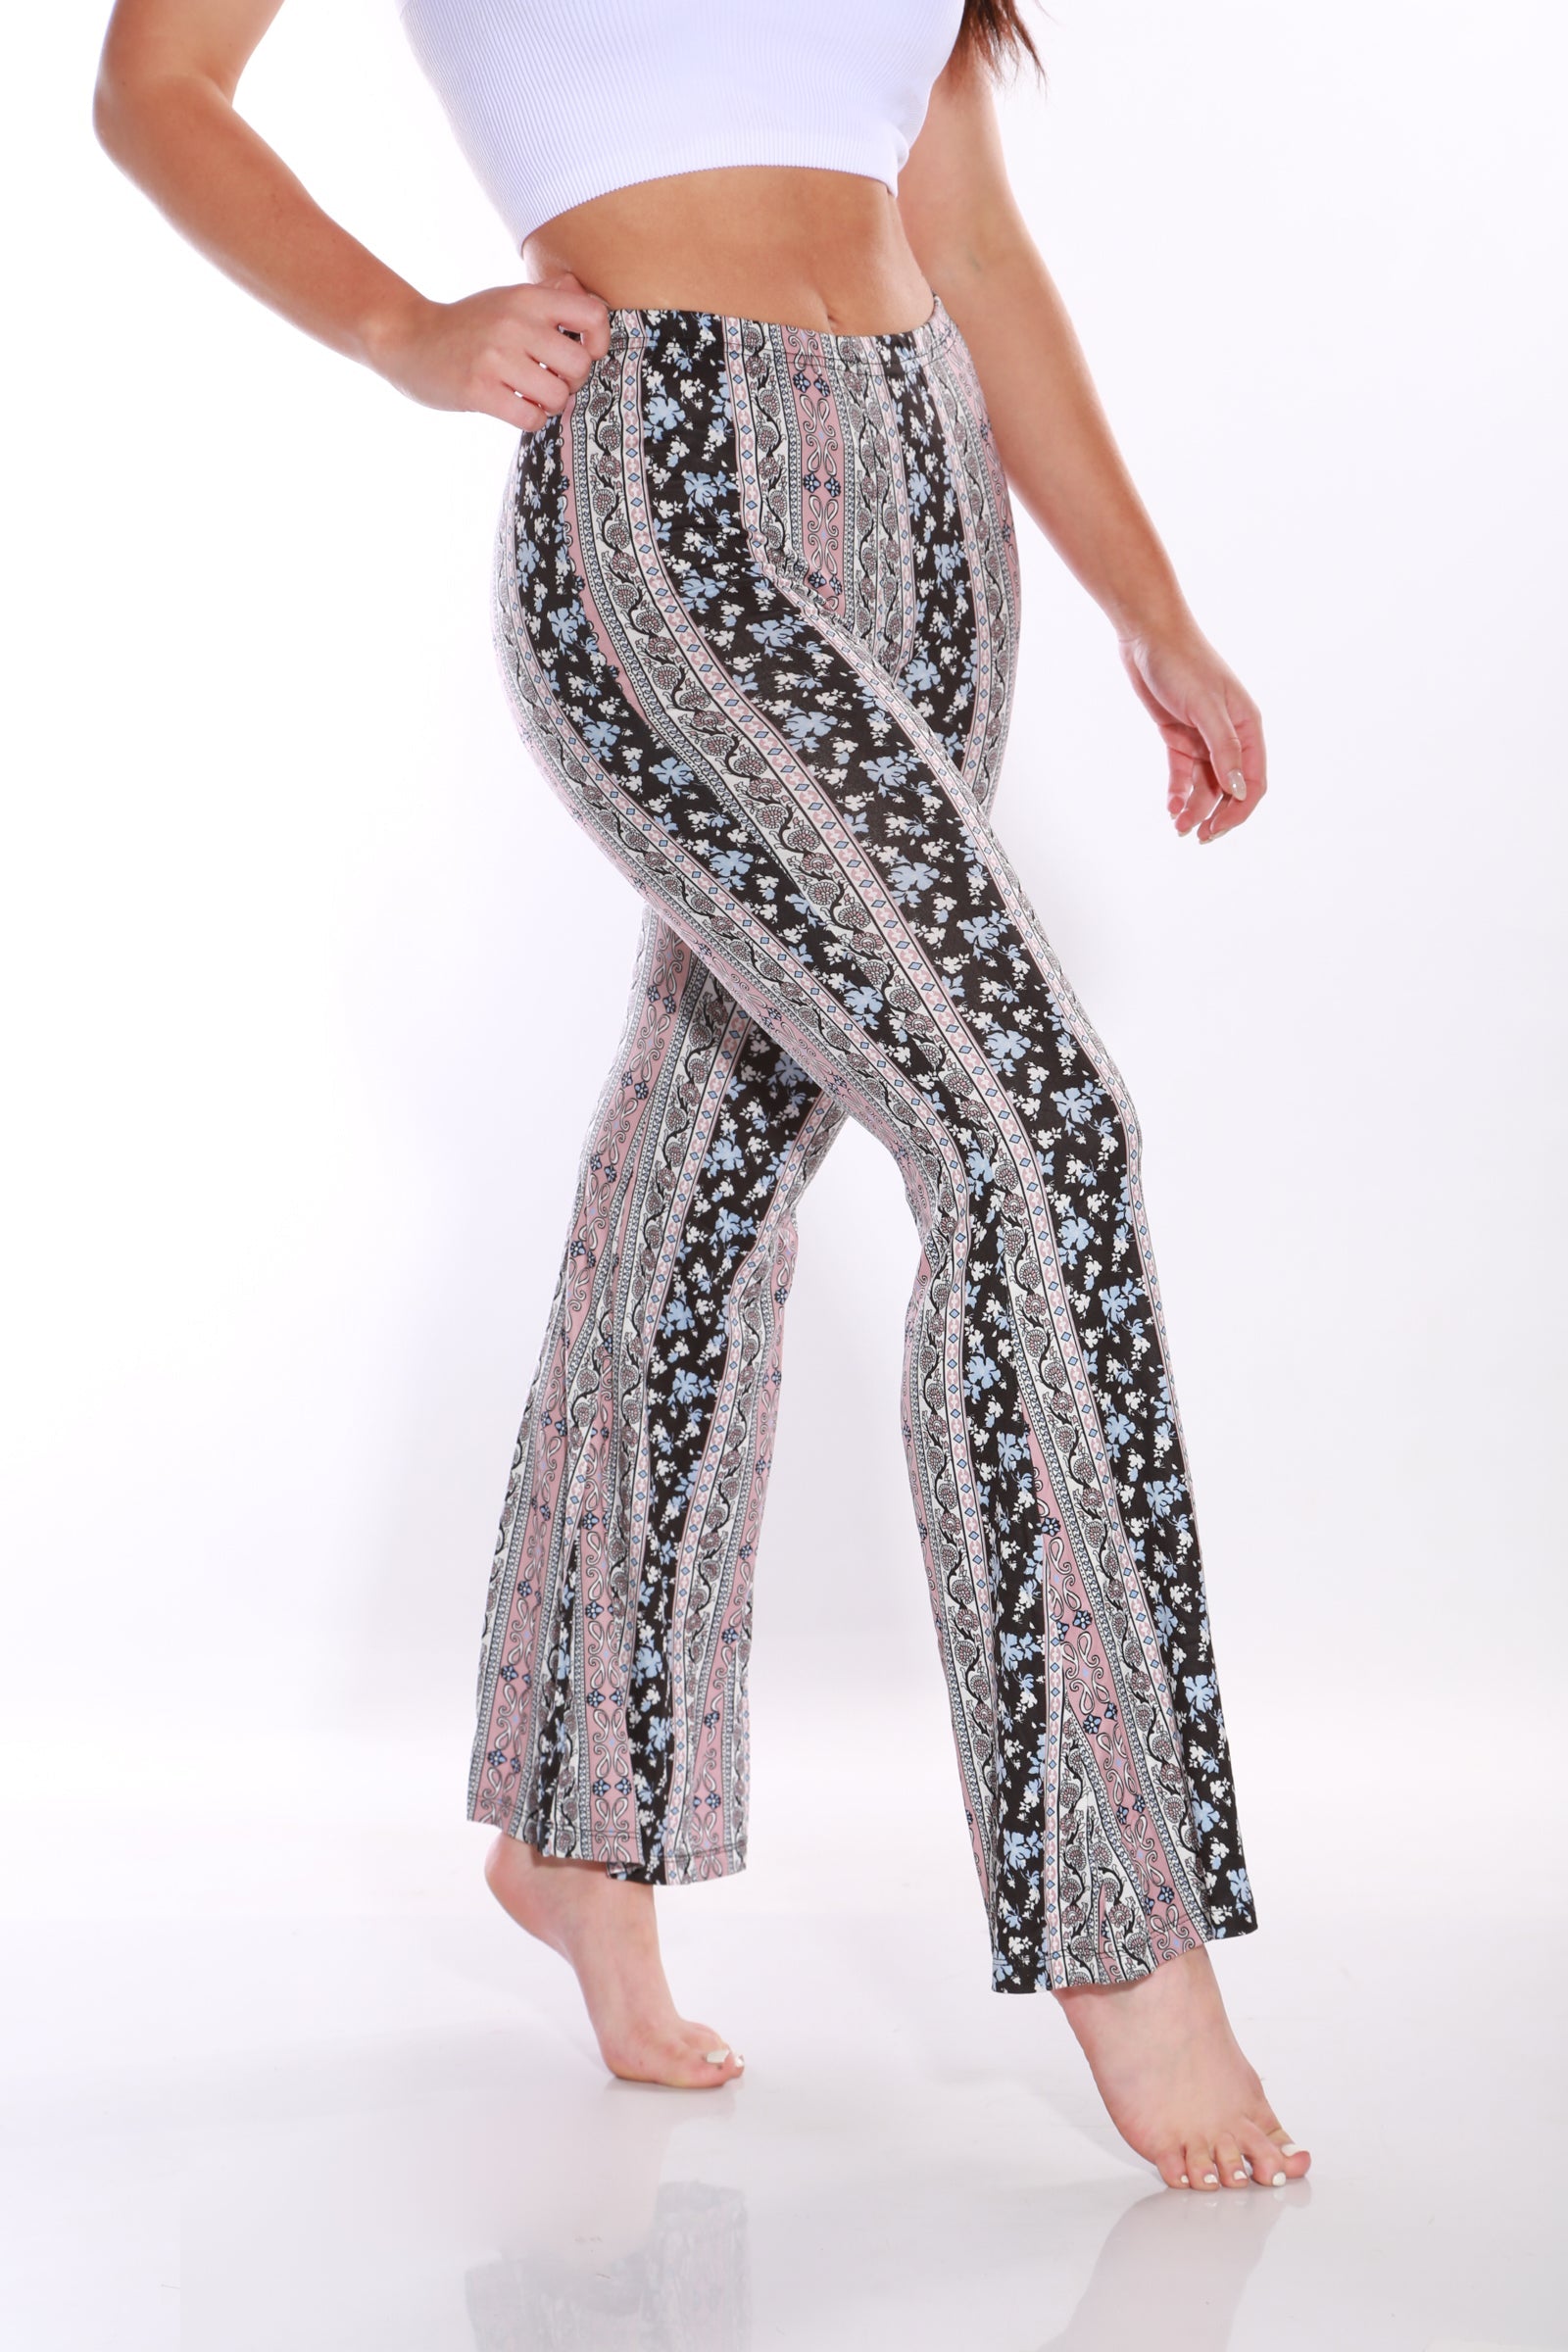 Image of TNG Hippie flare Leggings -pink